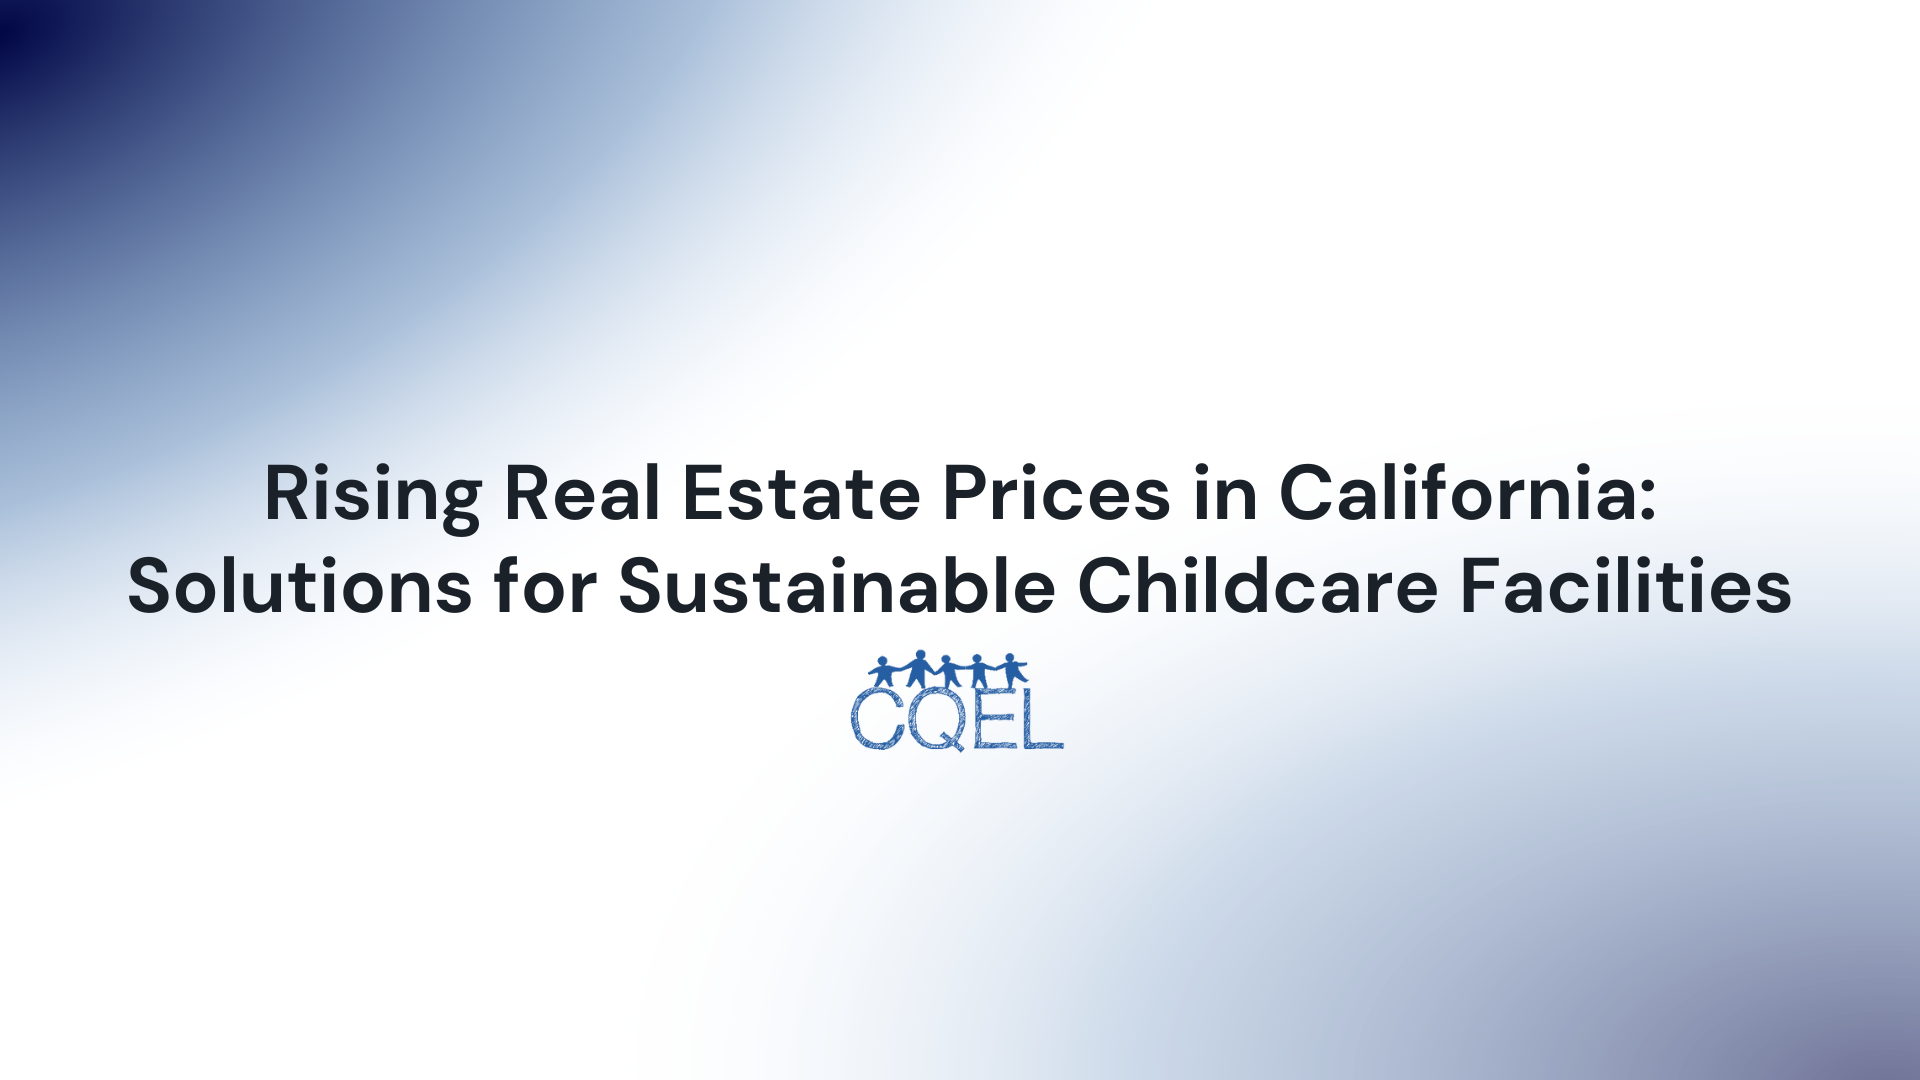 Rising Real Estate Prices in California: Solutions for Sustainable Childcare Facilities